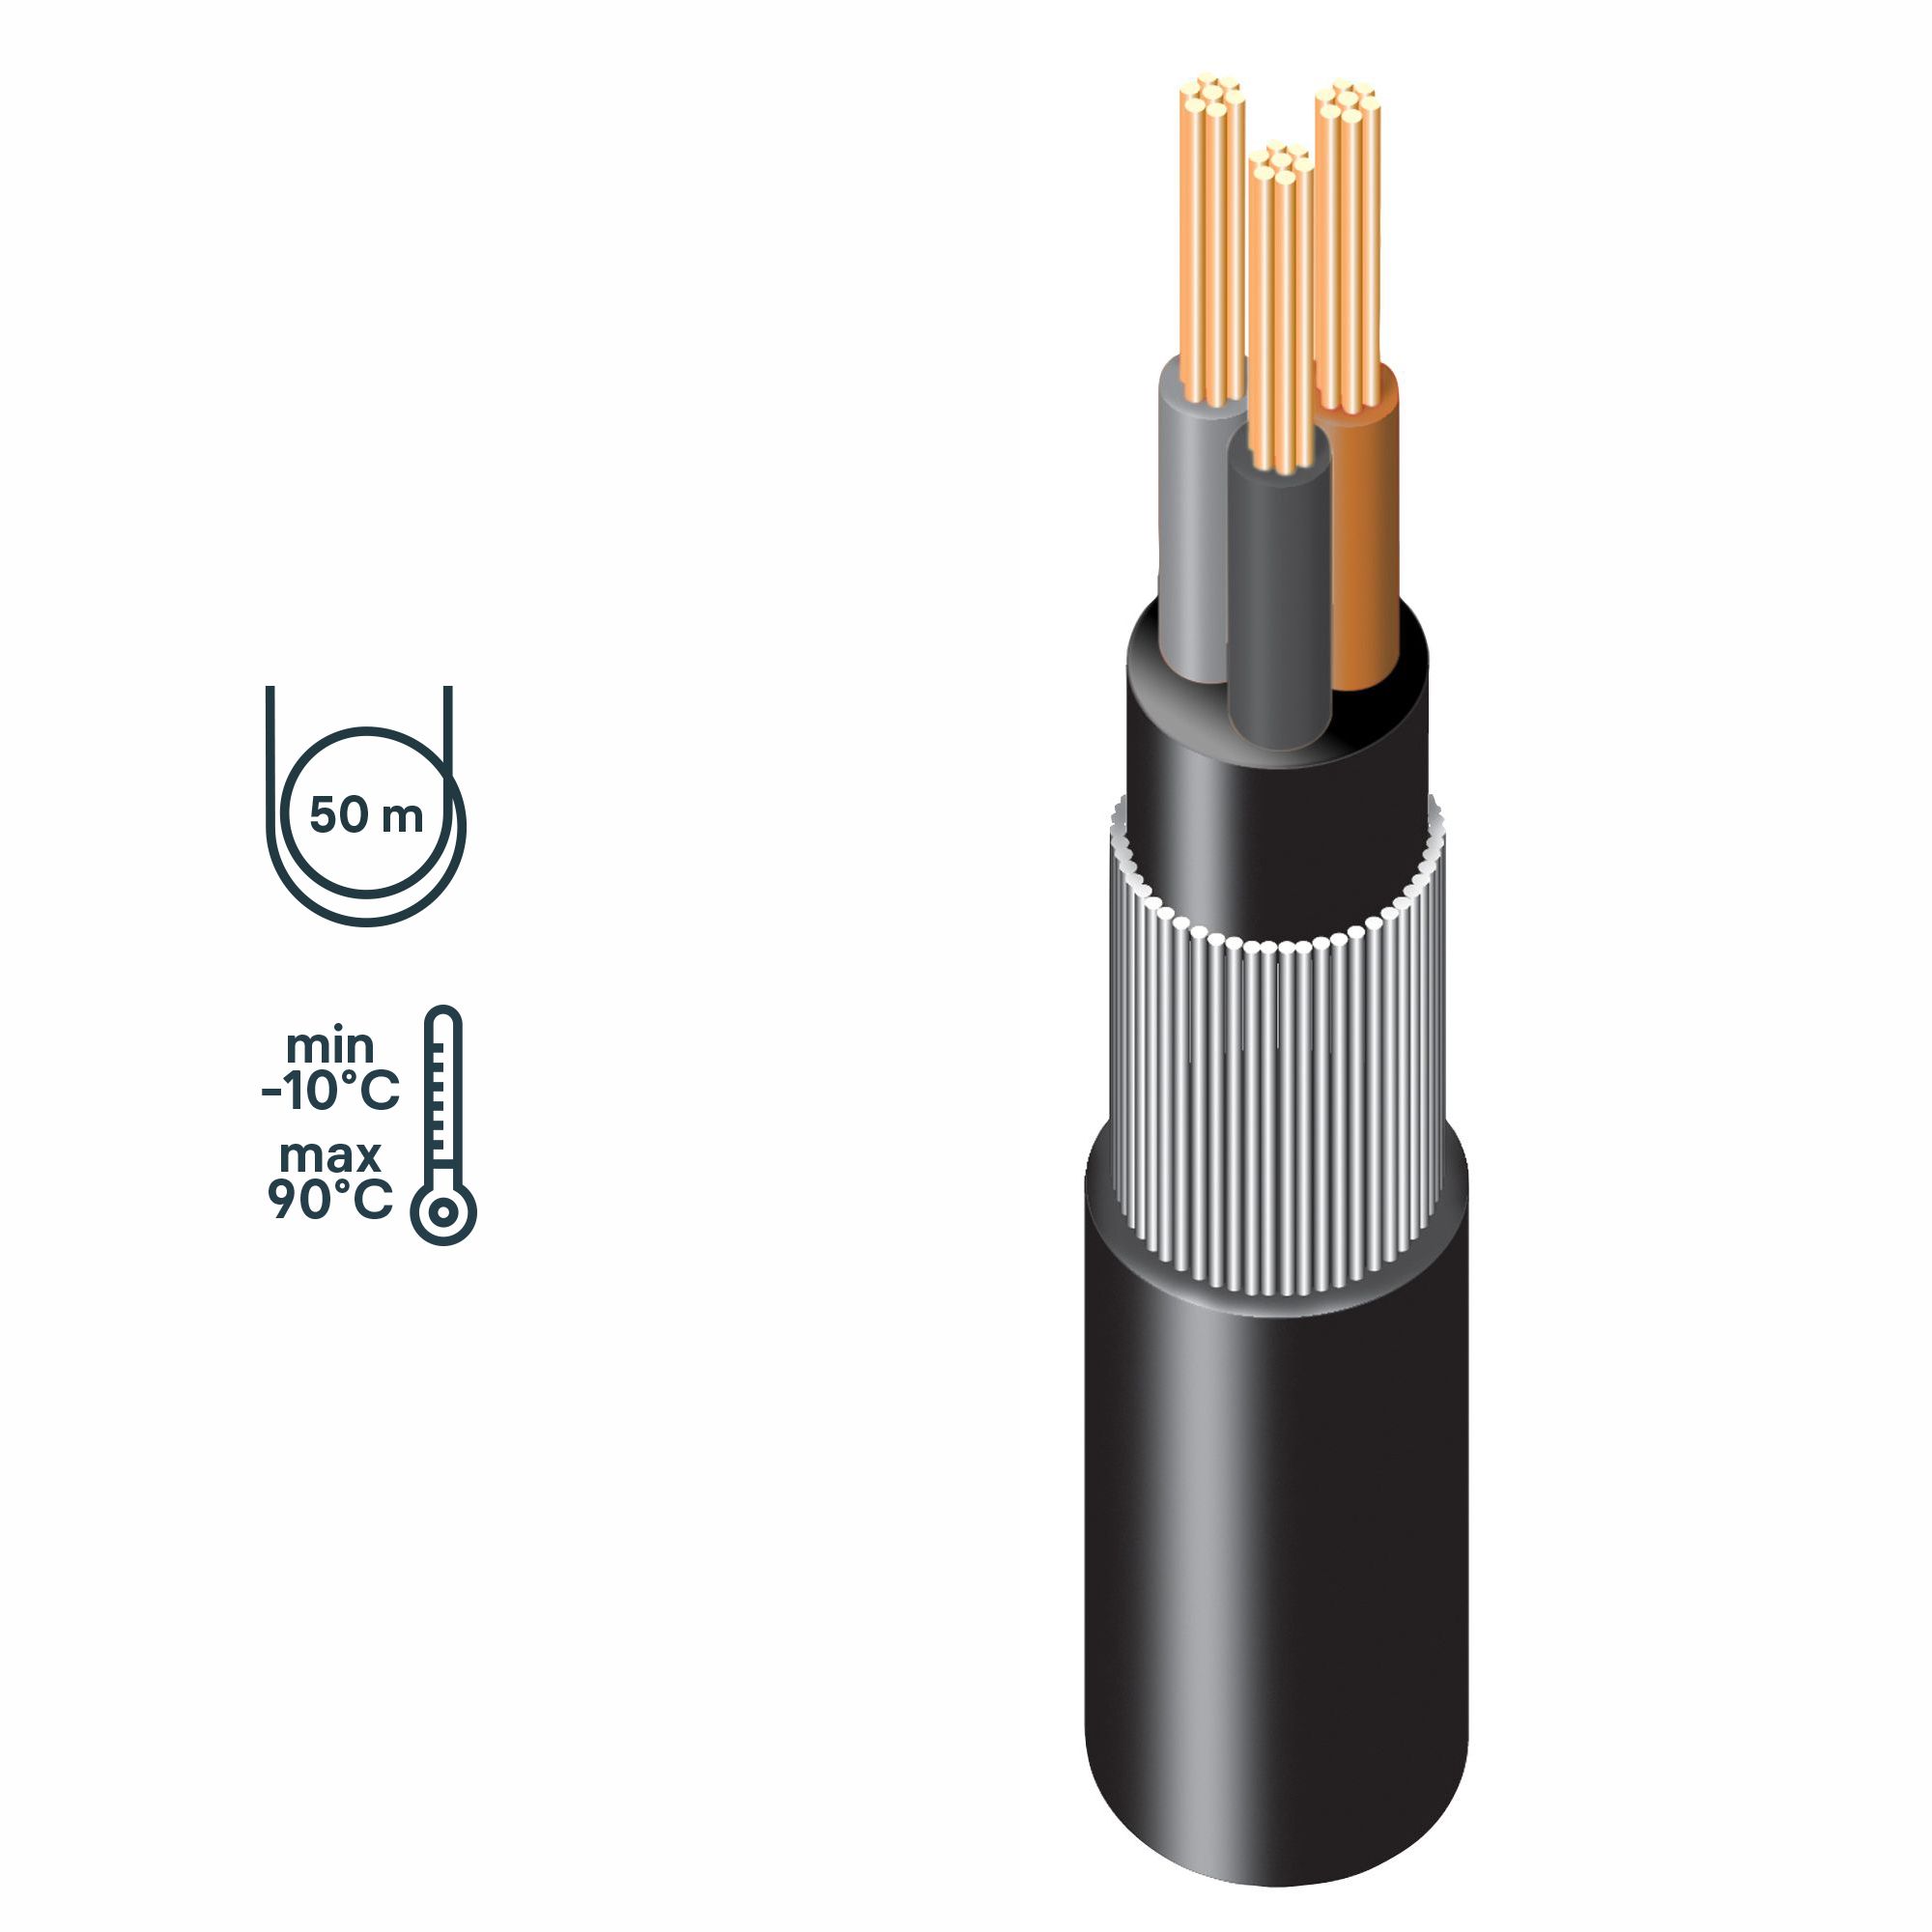 Prysmian Black 3-core Armoured Cable 2.5mm² x 50m